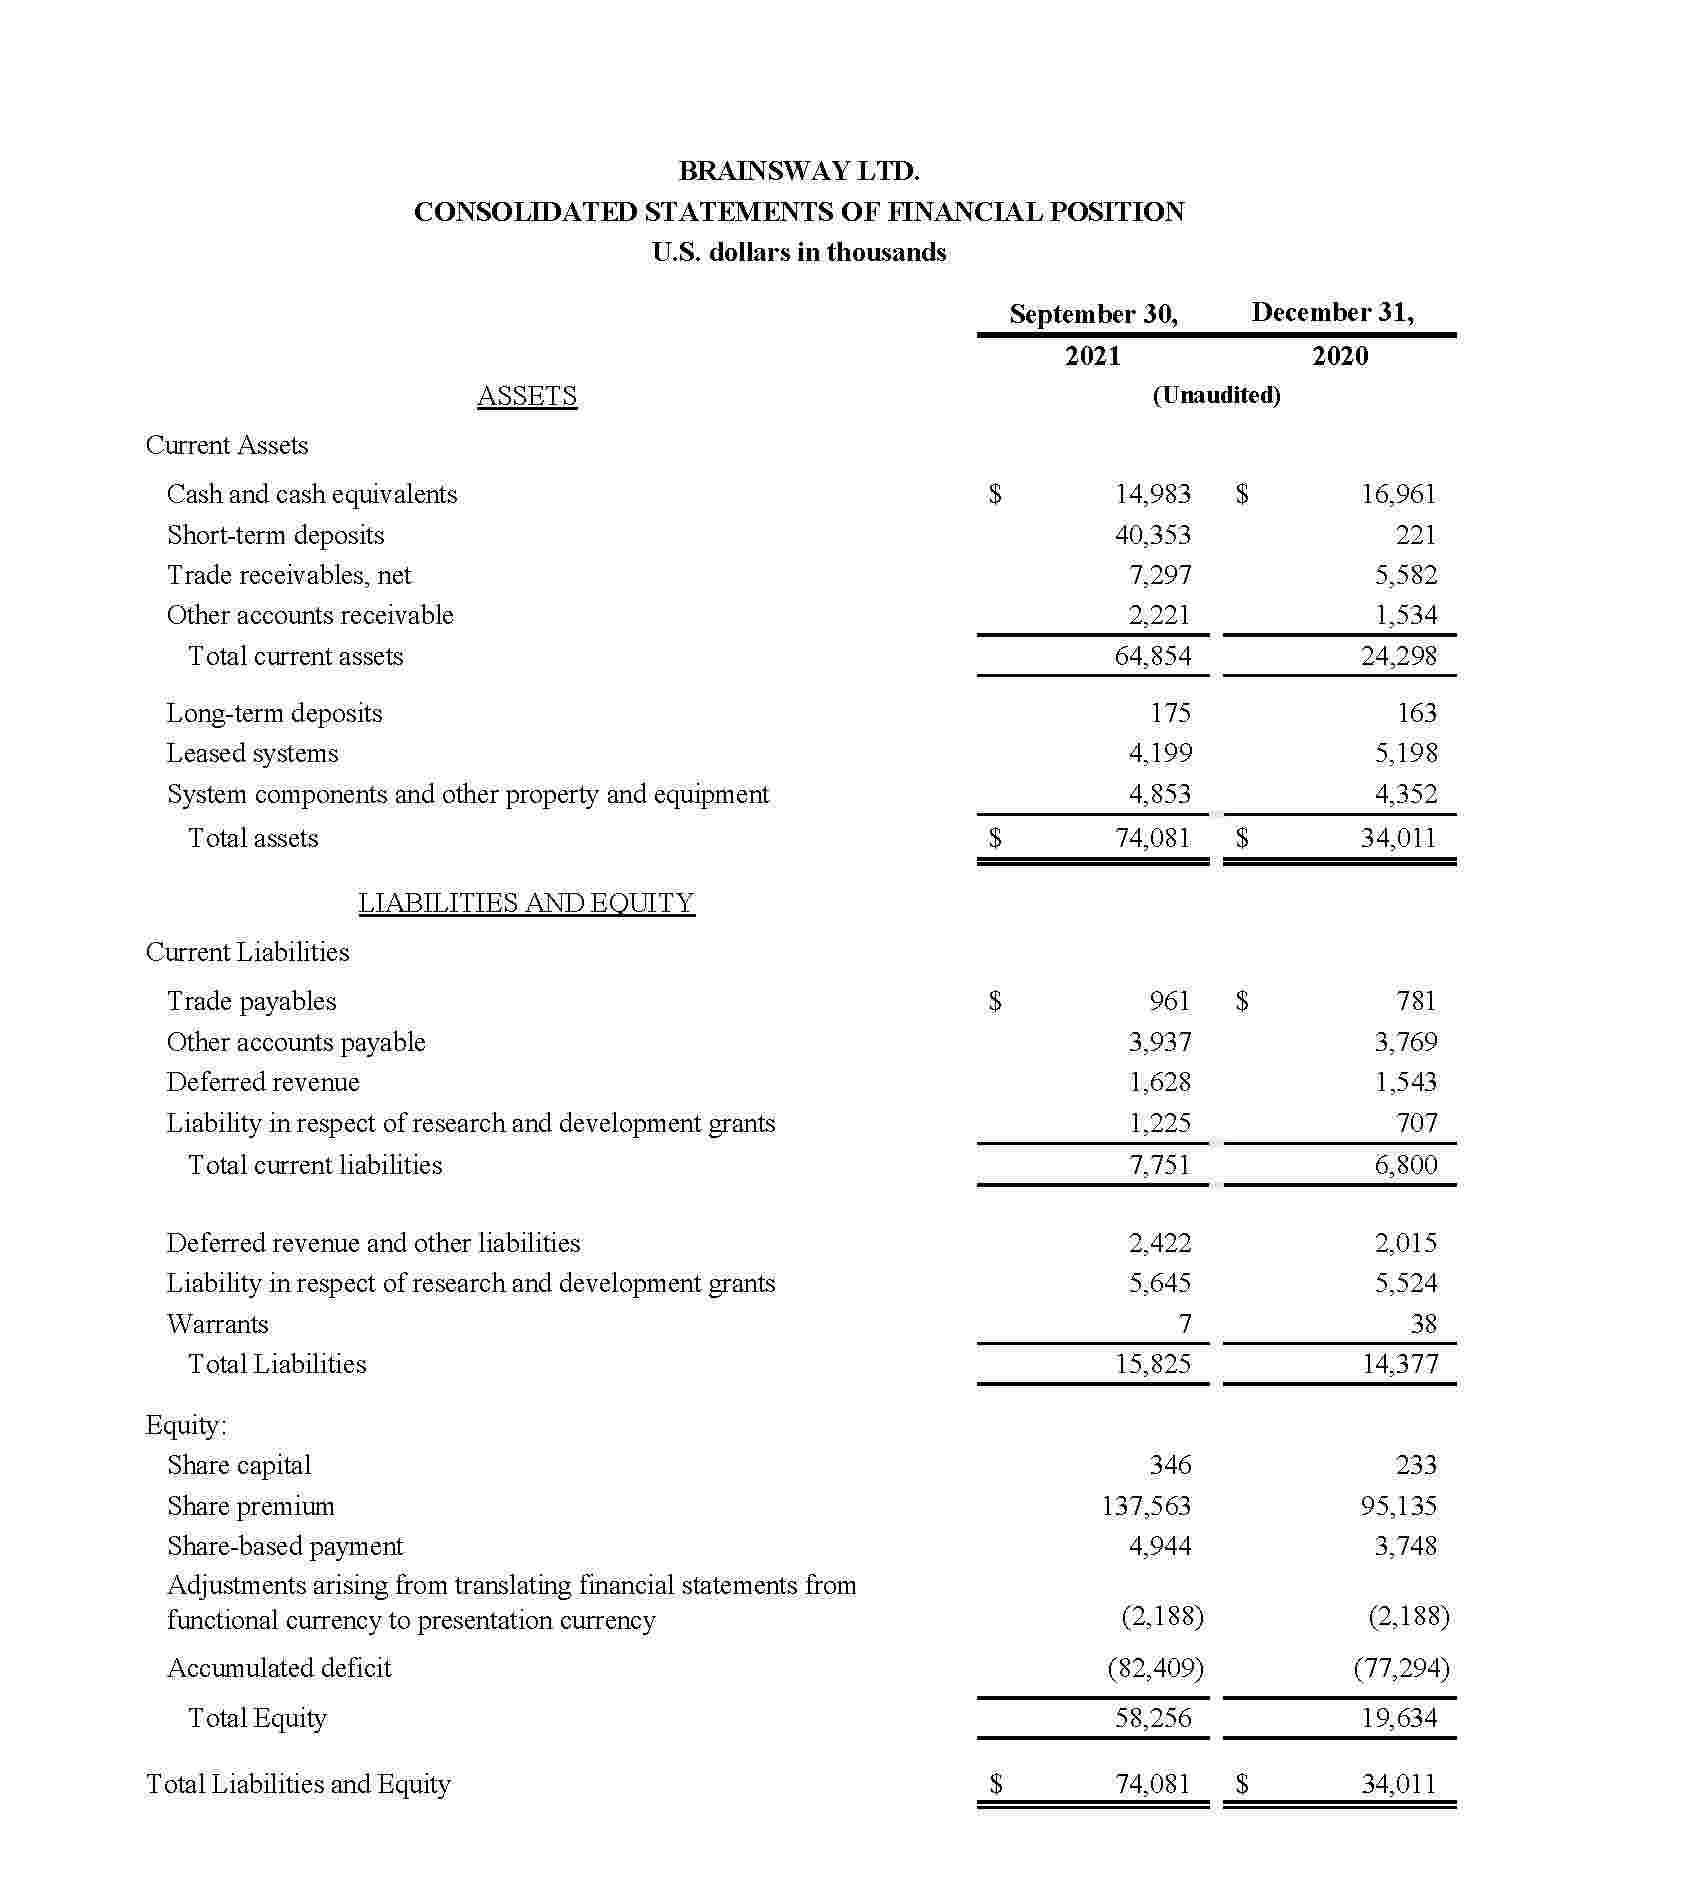 BrainsWay consolidated statement of financial position Third Quarter 2021